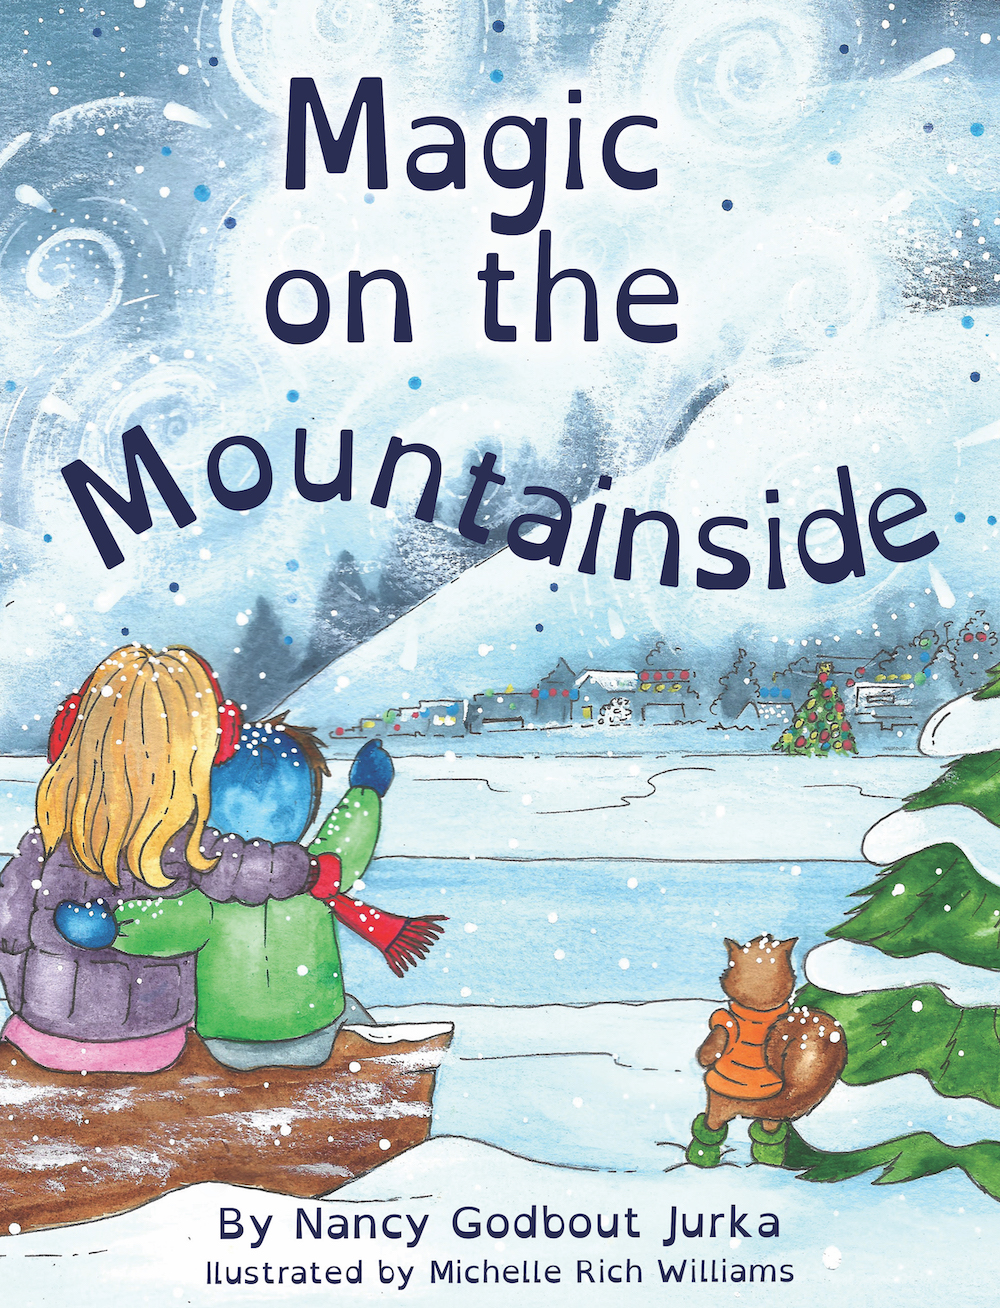 Cover image of Magic on the Mountainside